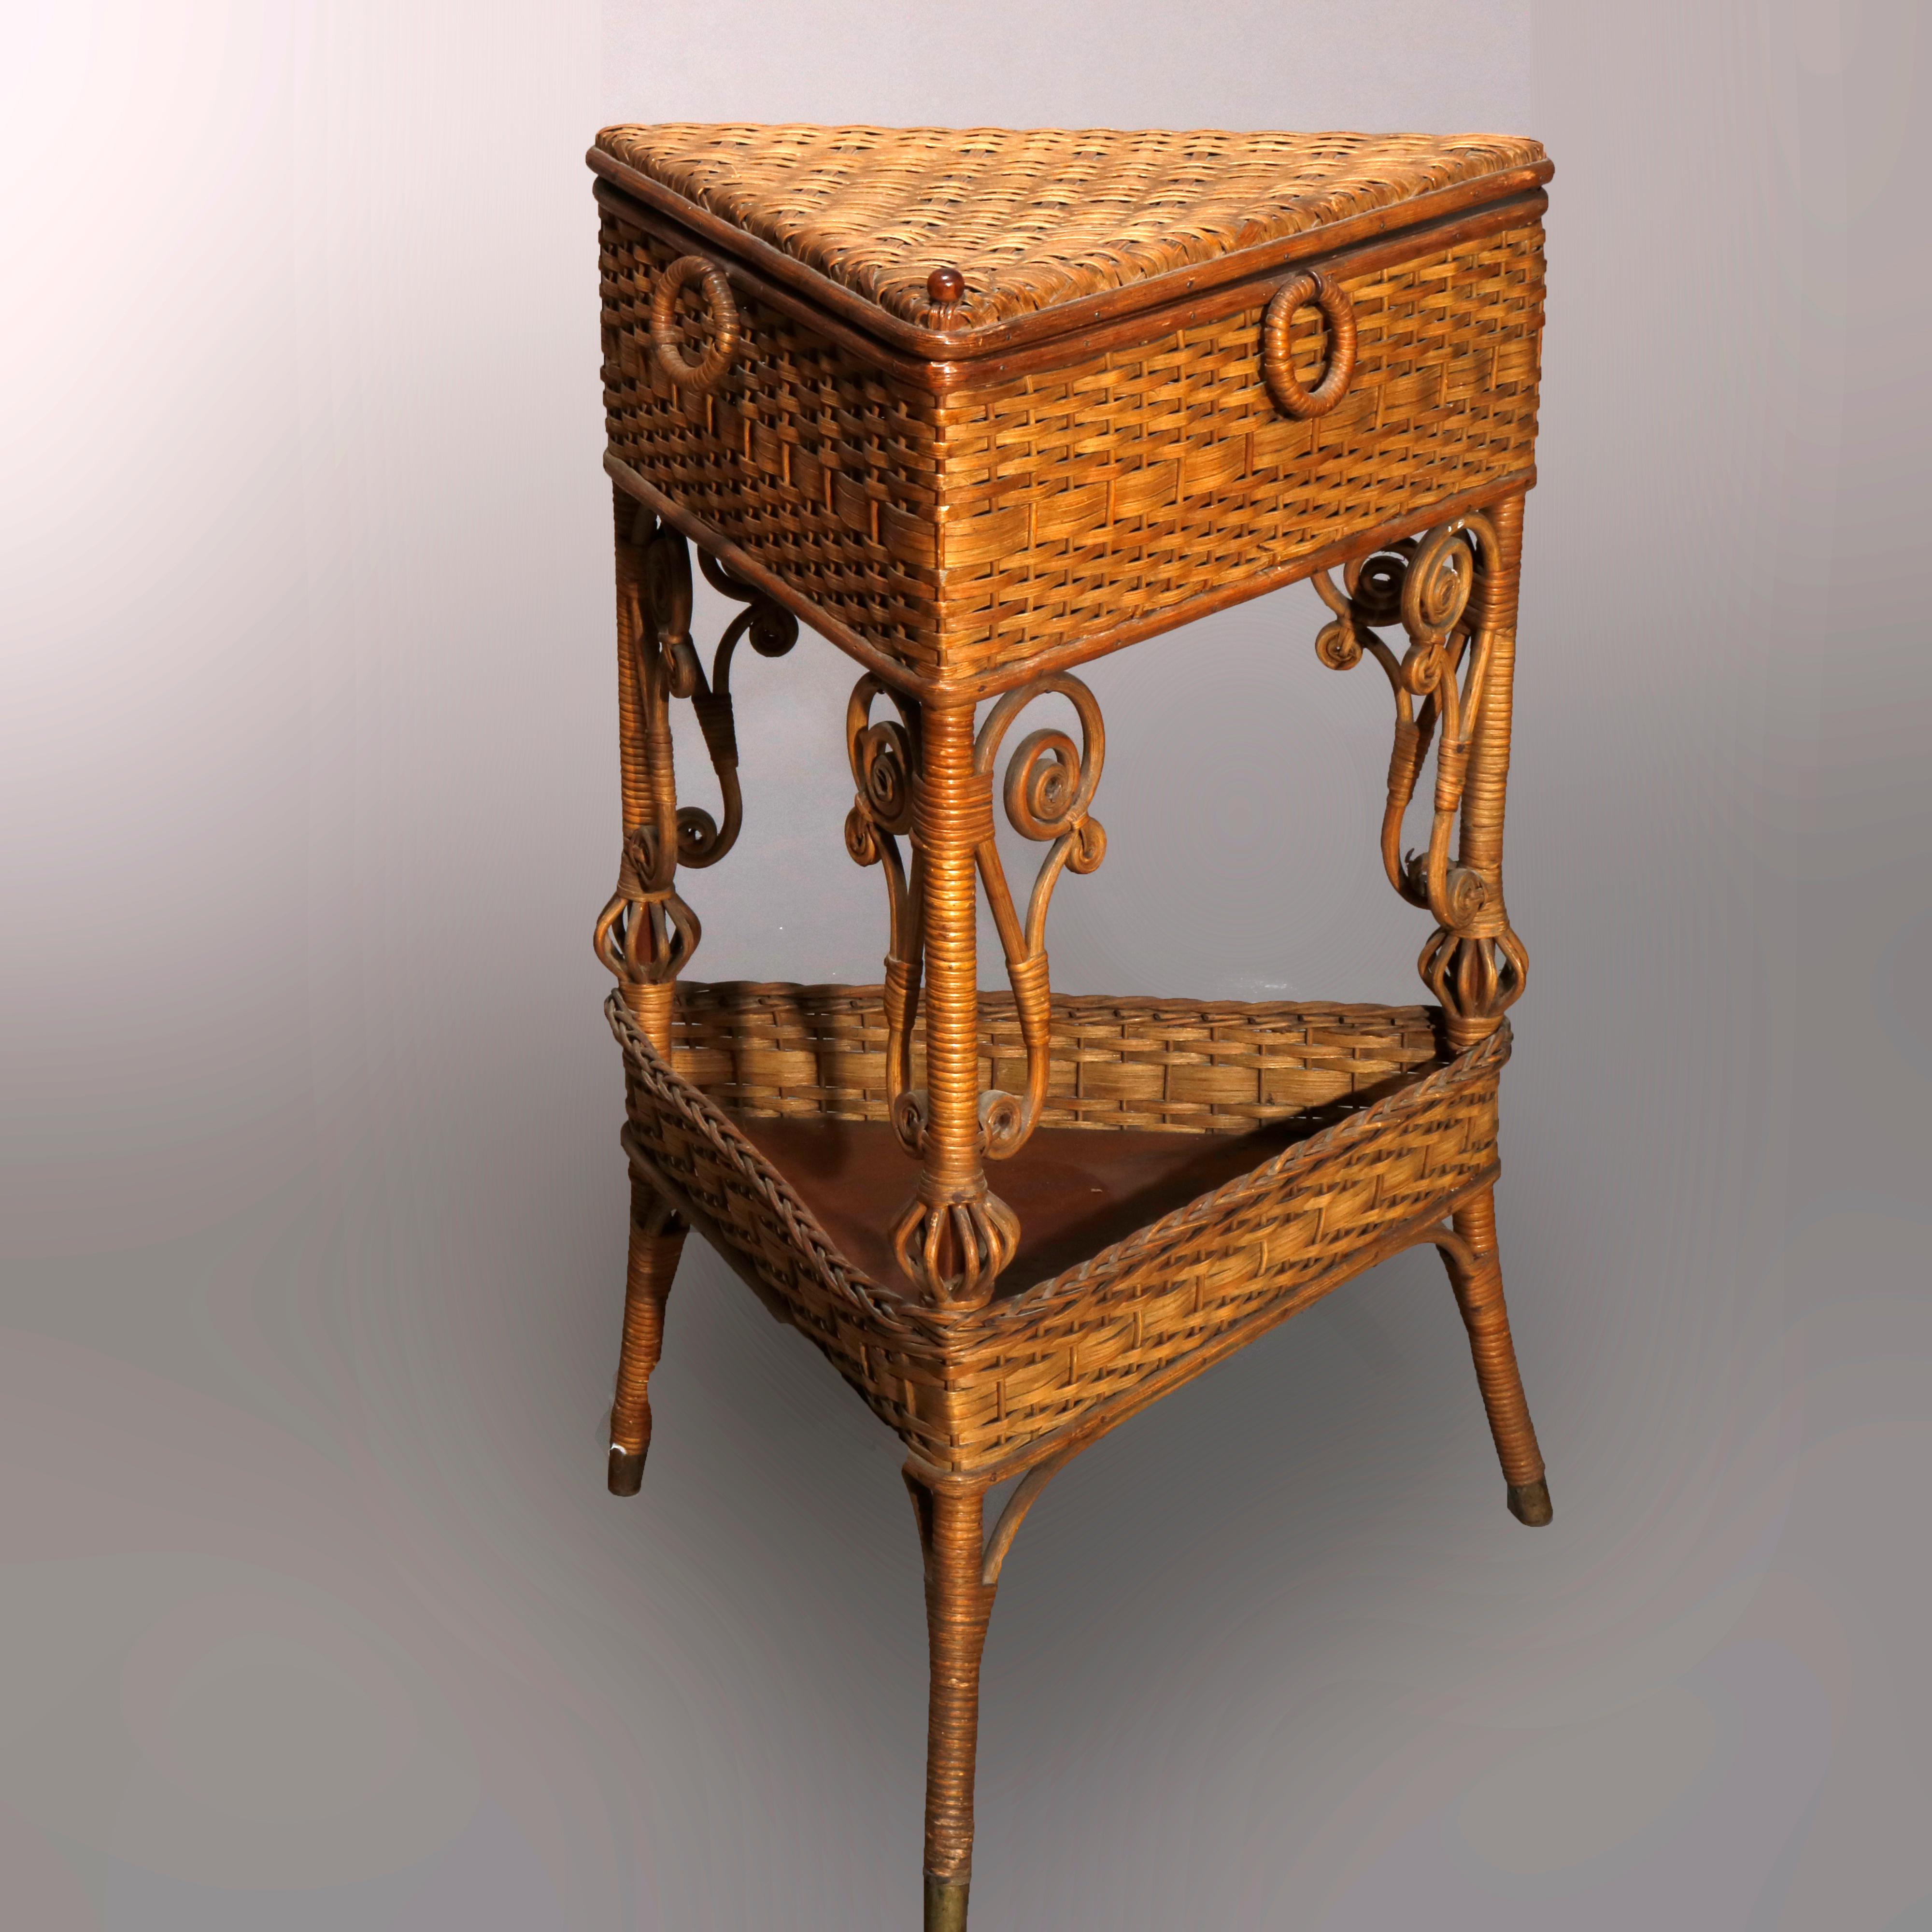 Carved Antique Victorian Heywood Wakefield Wicker Corner Sewing Stand, circa 1890